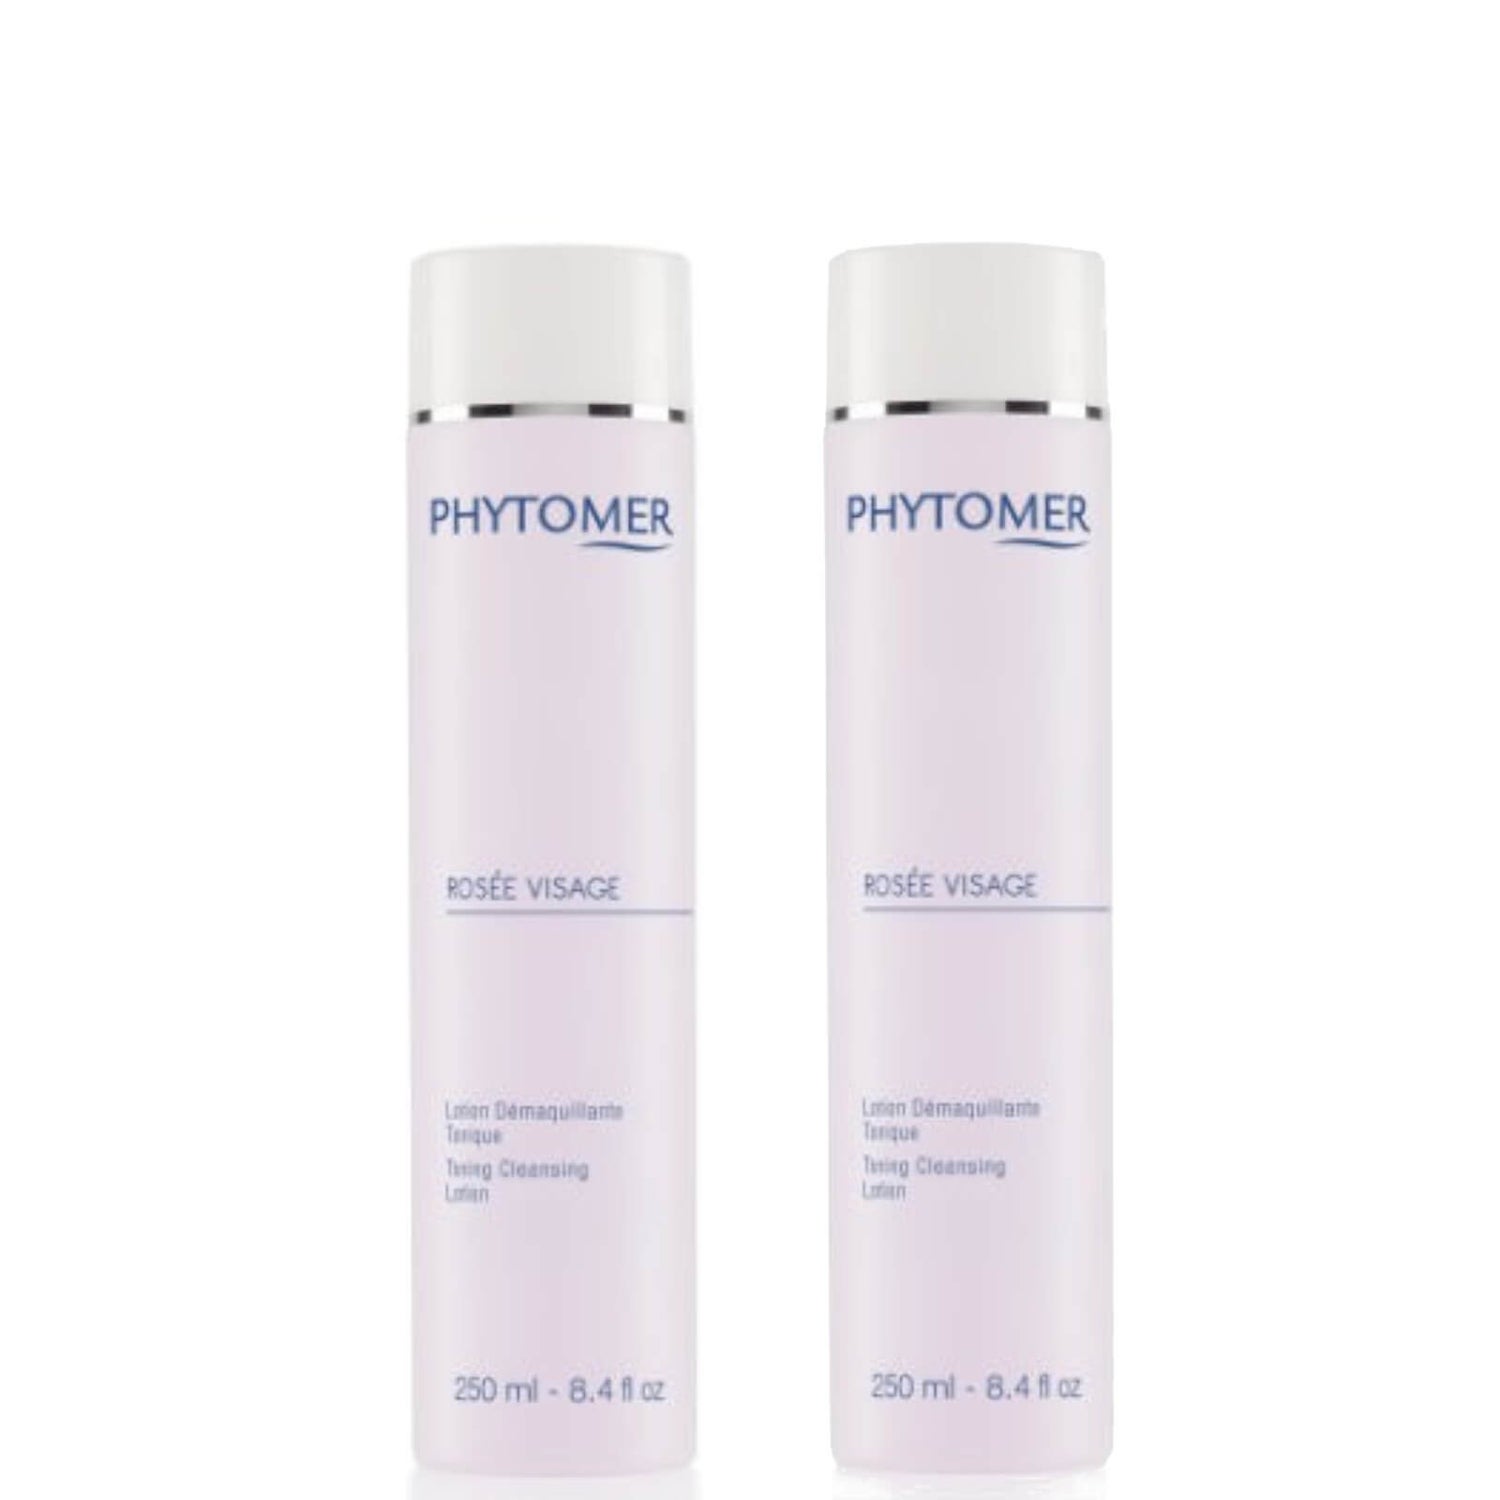 Phytomer Rosee Visage Toning Cleansing Lotion Duo 500ml - $72 Value